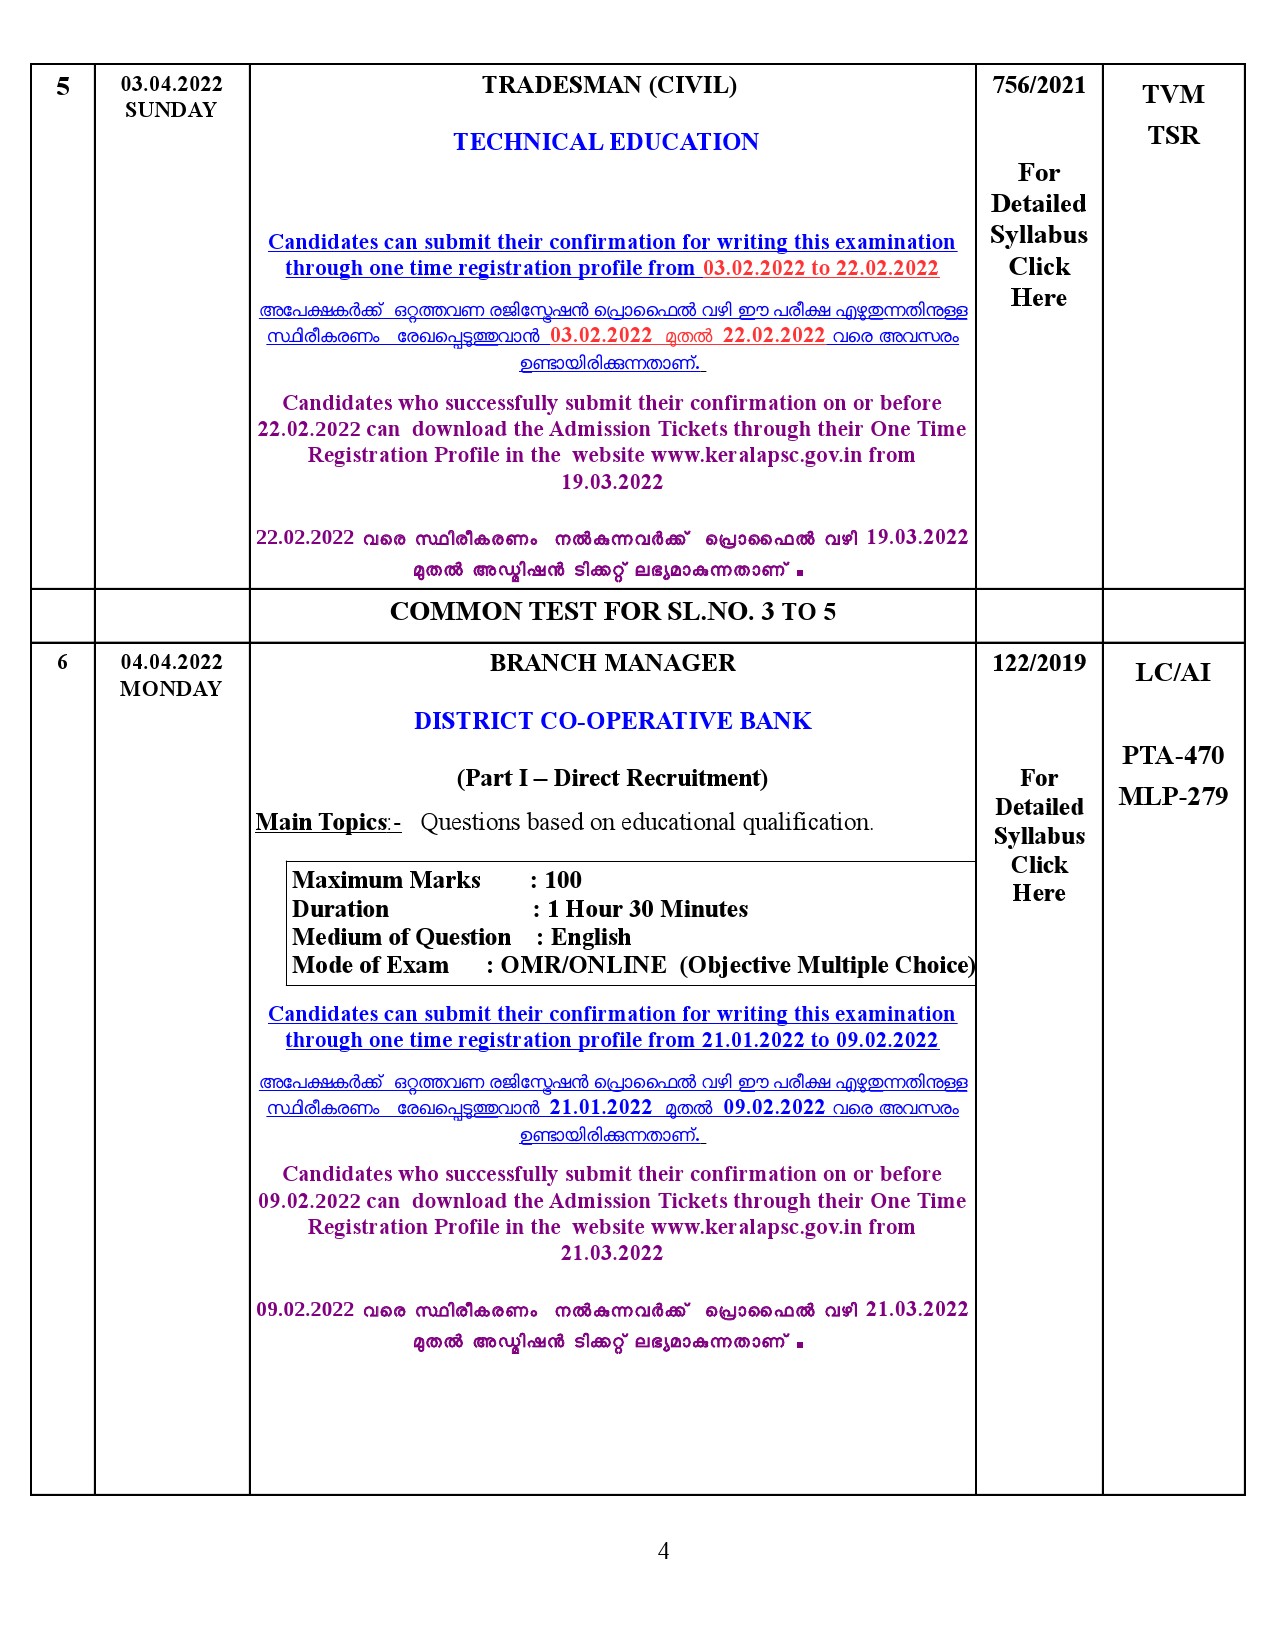 Examination Programme For The Month Of April 2022 - Notification Image 4